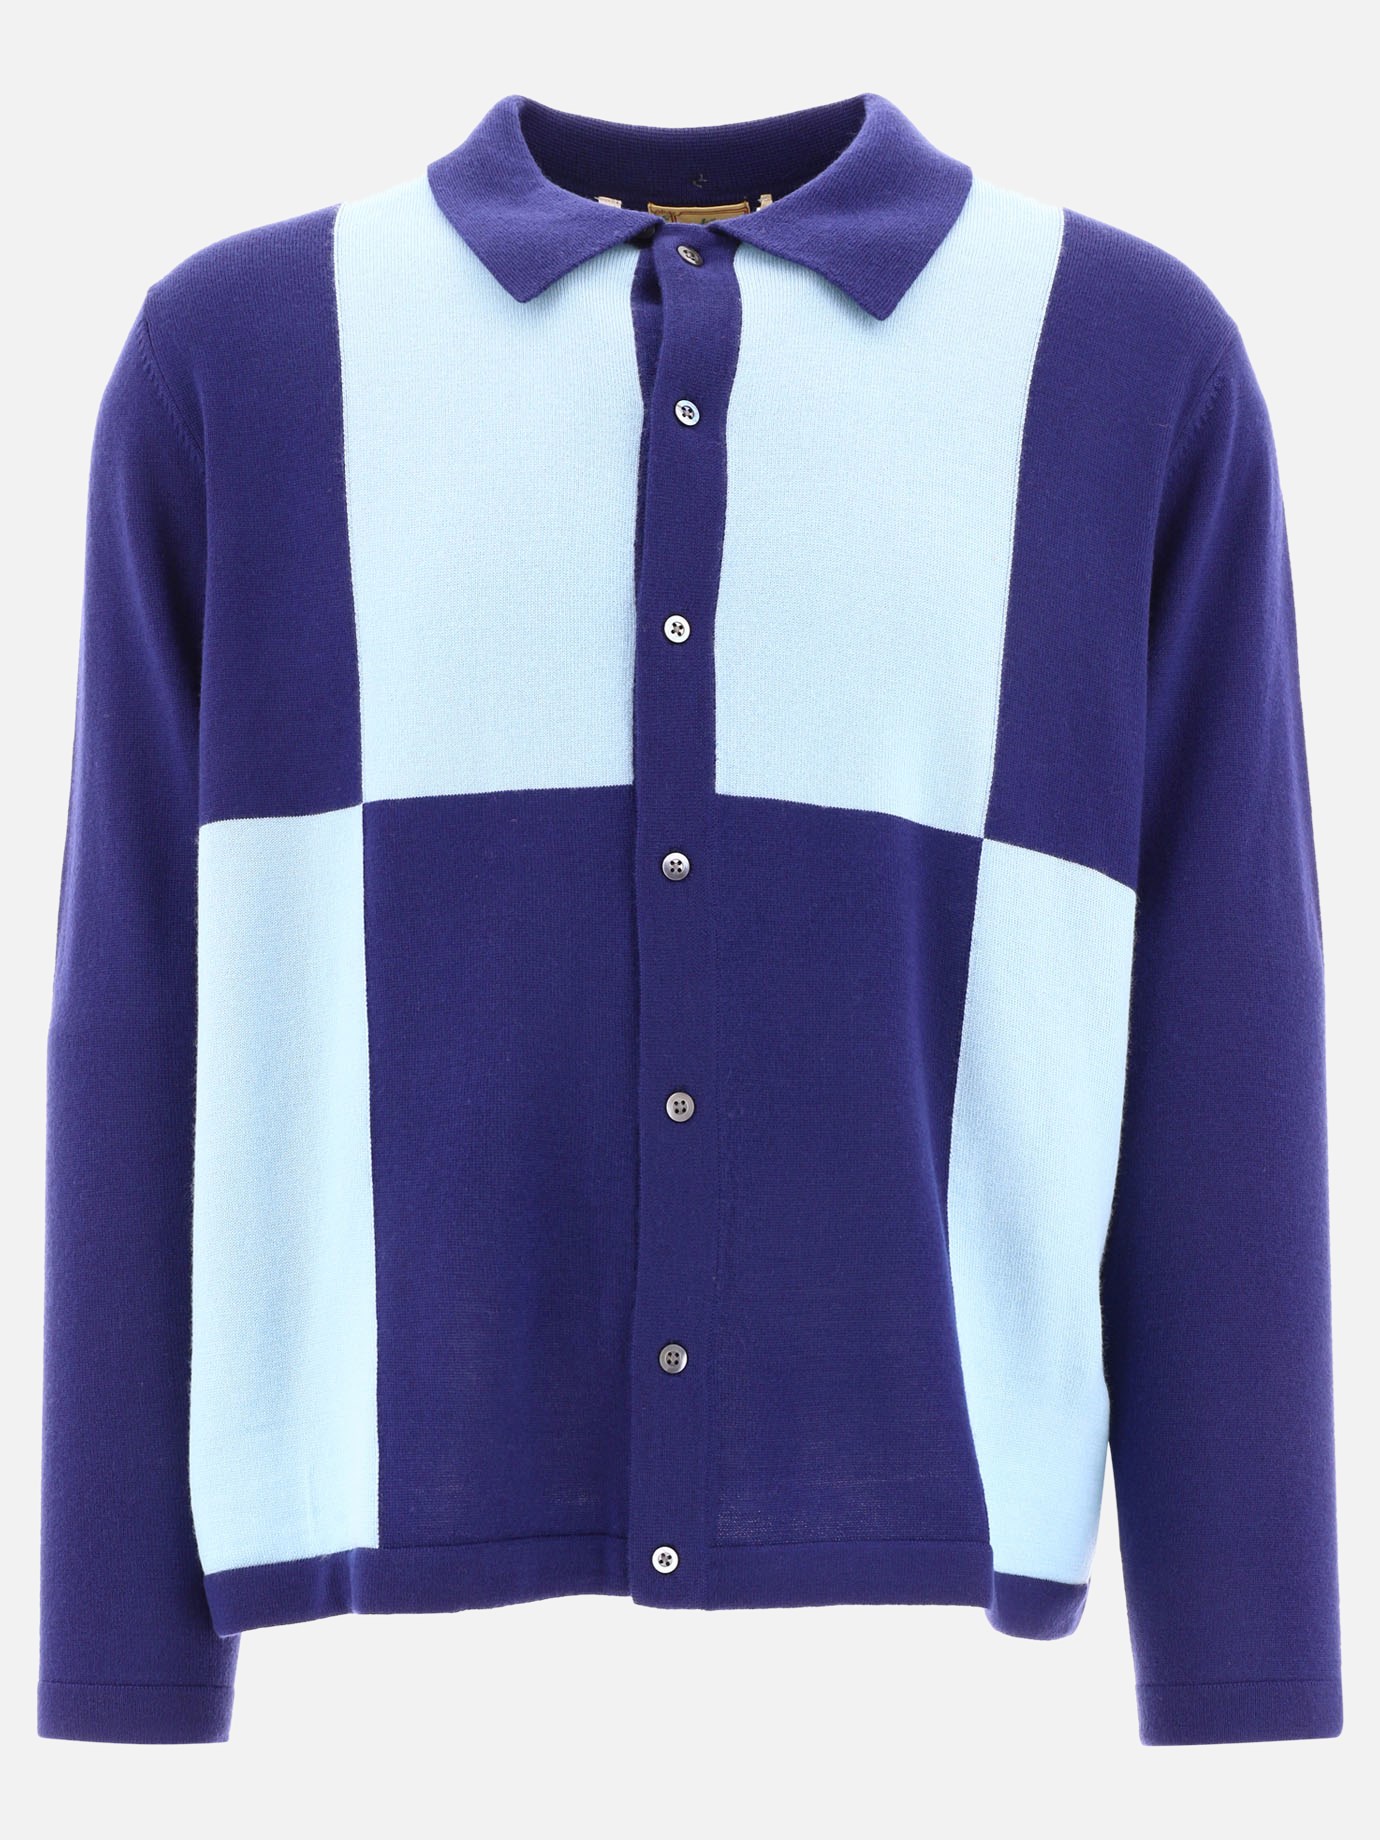 Maglione  Colorblock by Levi's Vintage Clothing - 2